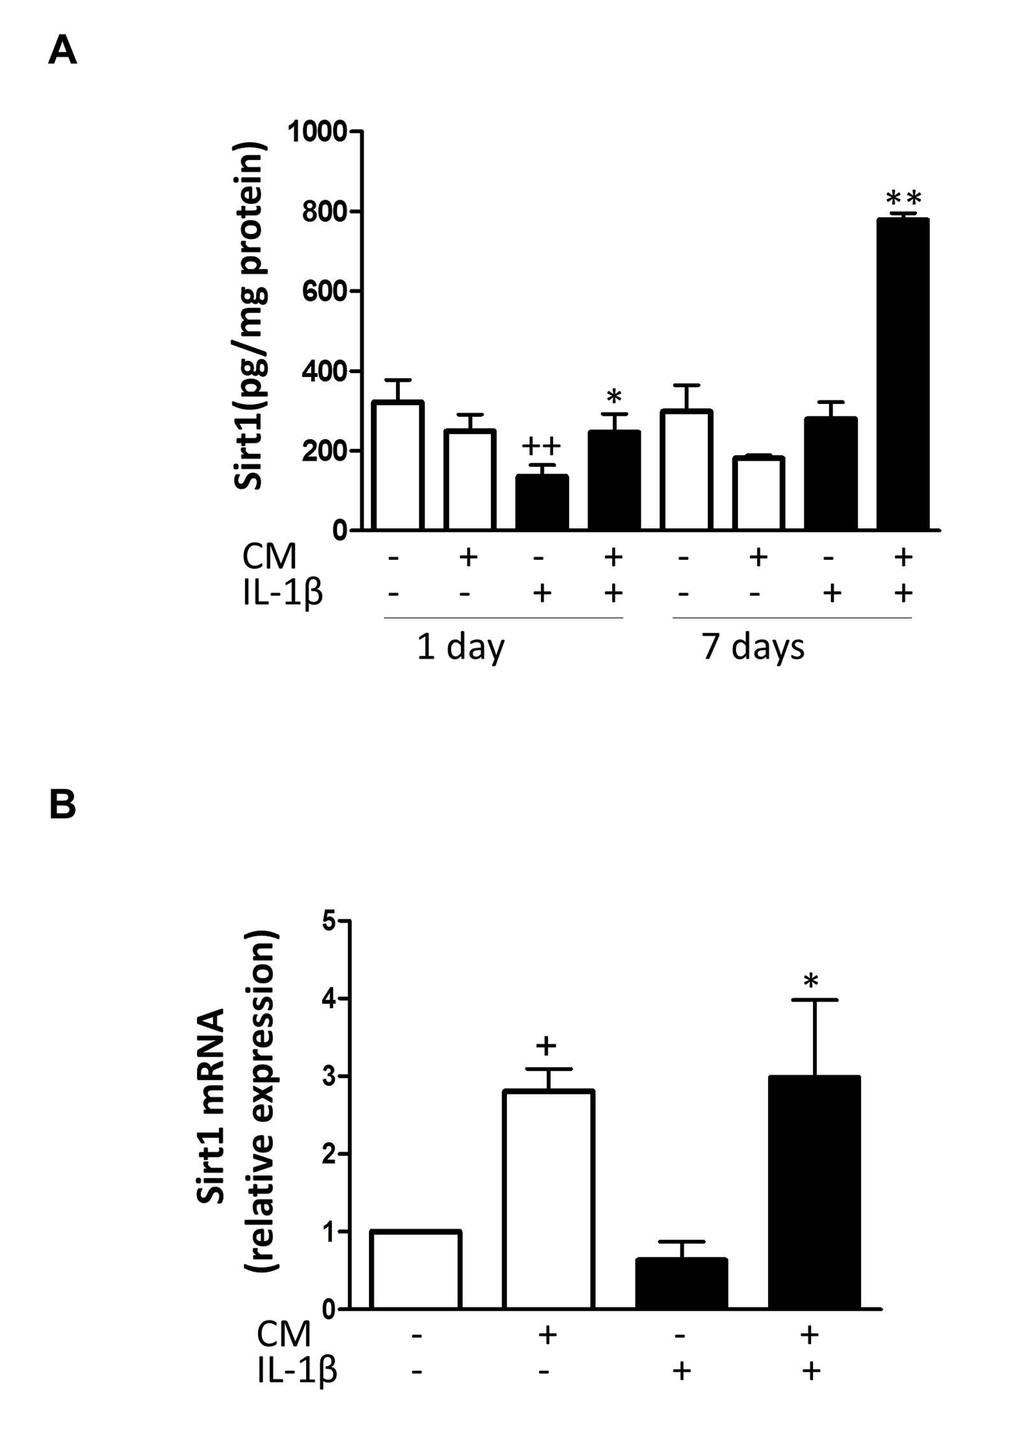 Effect of CM on Sirt1. (A) Protein levels of Sirt1 were assessed by ELISA. OA chondrocytes were incubated with IL-1β and/or CM for the indicated times. (B) Sirt1 mRNA expression was determined by quantitative real-time PCR. OA chondrocytes were incubated with IL-1β and/or CM for 24 hours. Data are shown as mean±standard deviation of N=8 separate experiments with cells from separate donors. +p